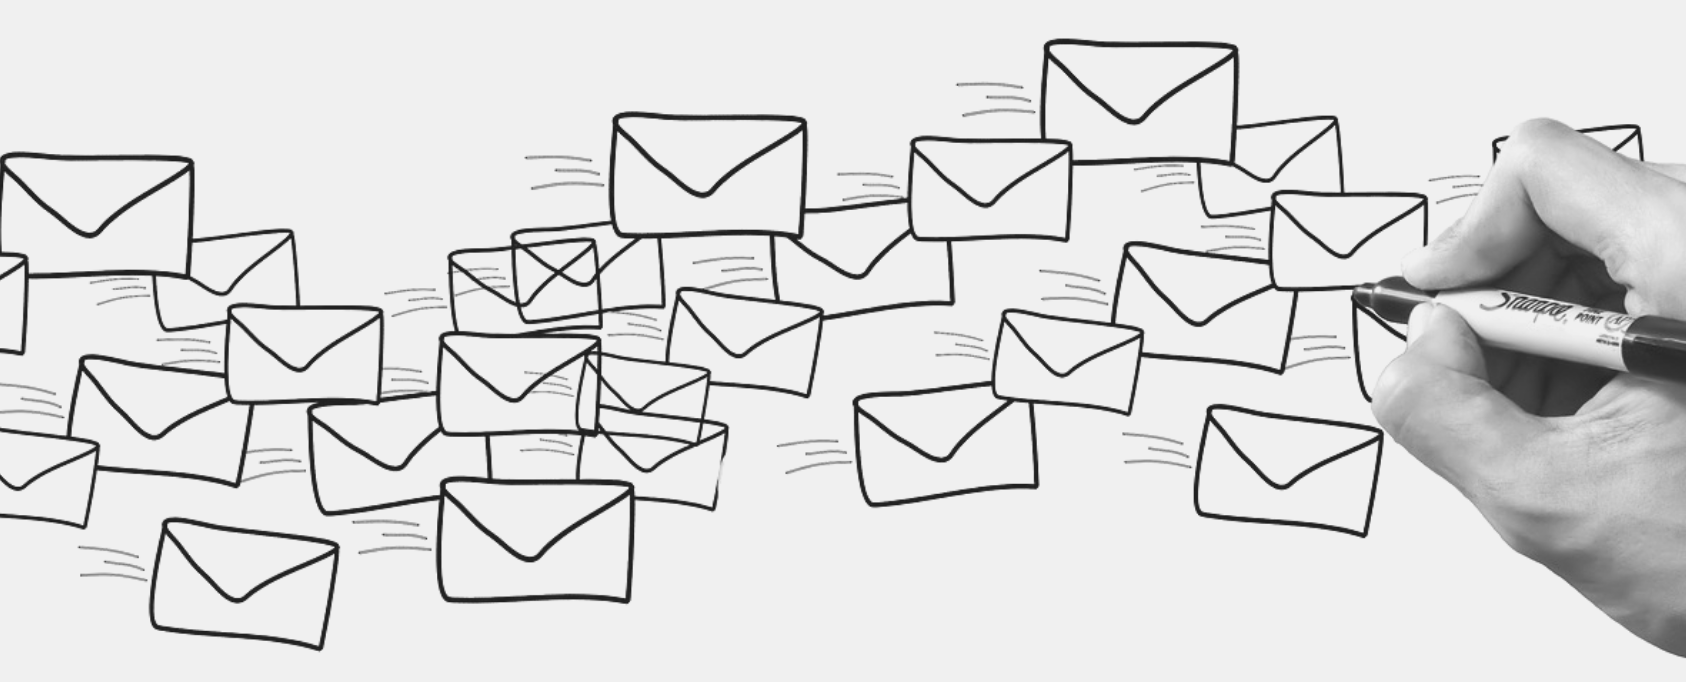 Tips for Taming Your Inbox.